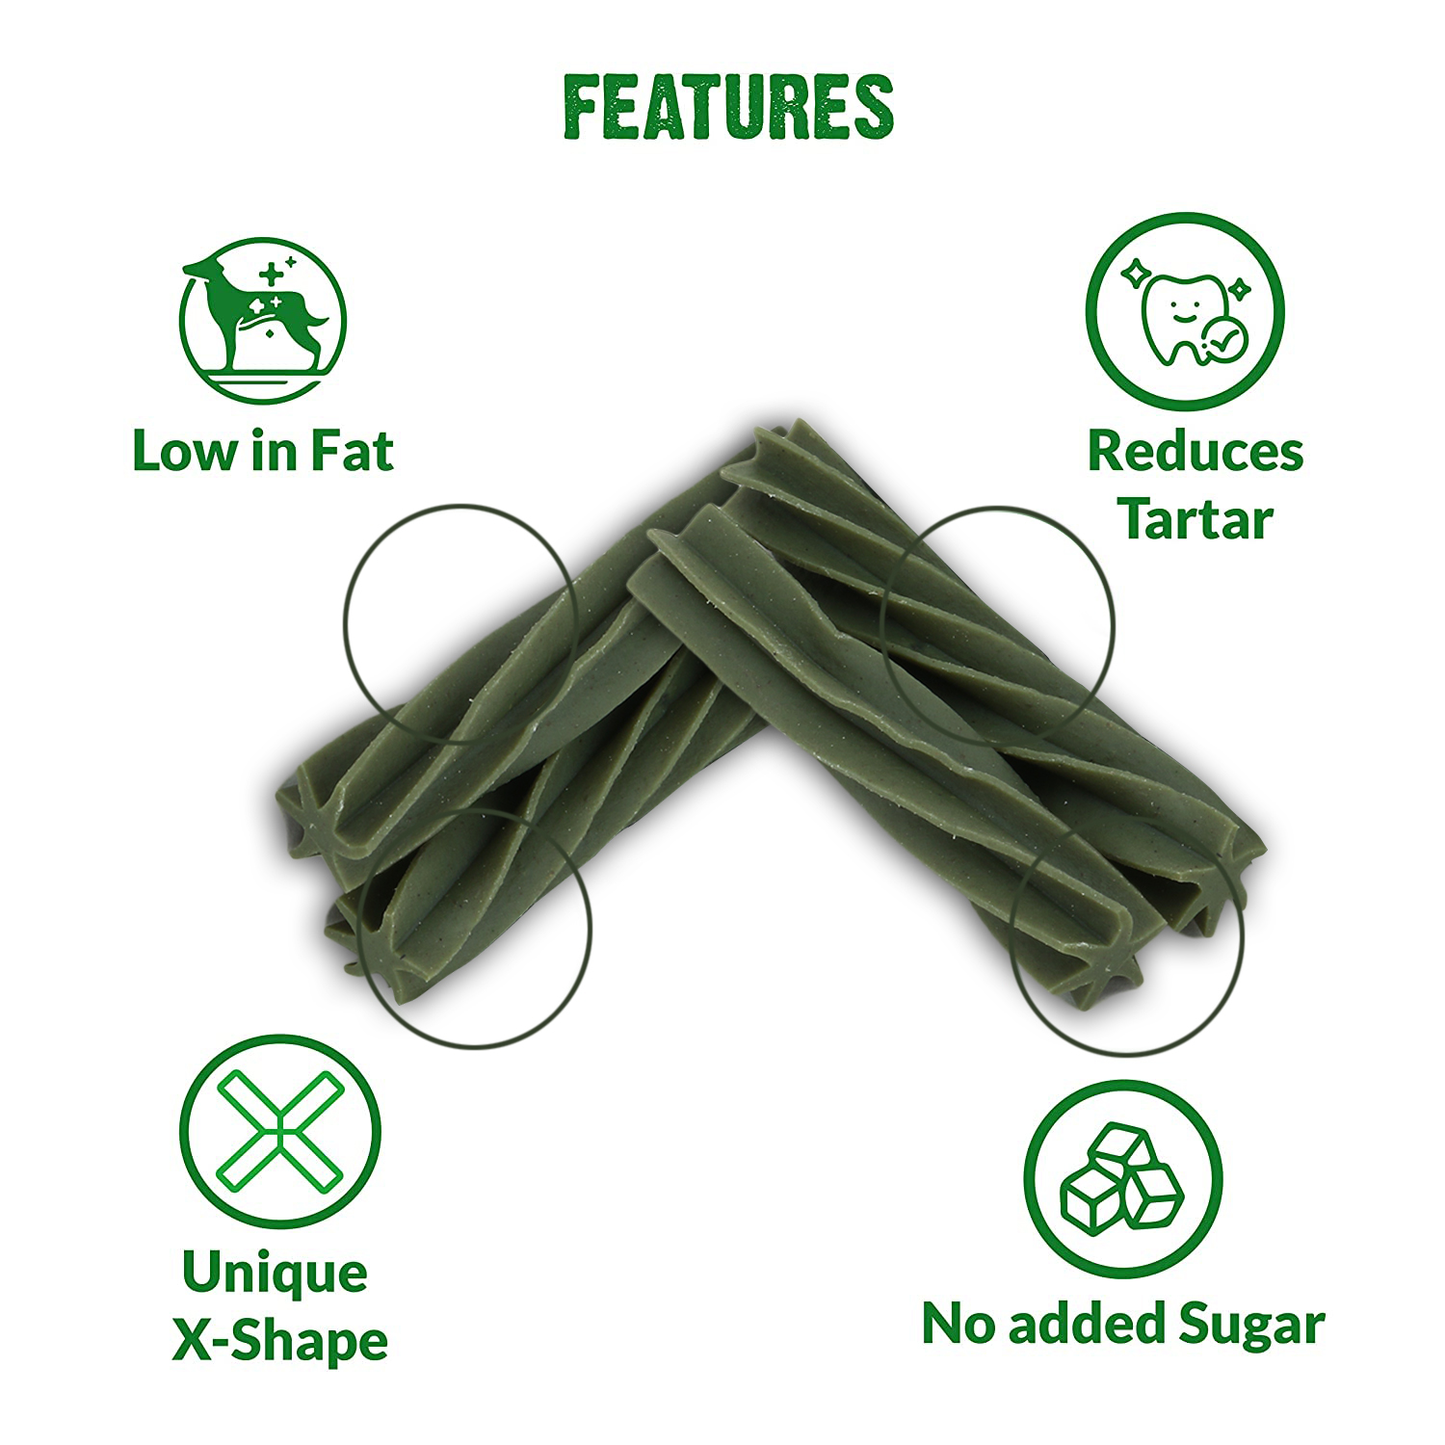 BASIL Dental Care Twisted Chew Sticks for Dogs & Puppies | 200 Grams